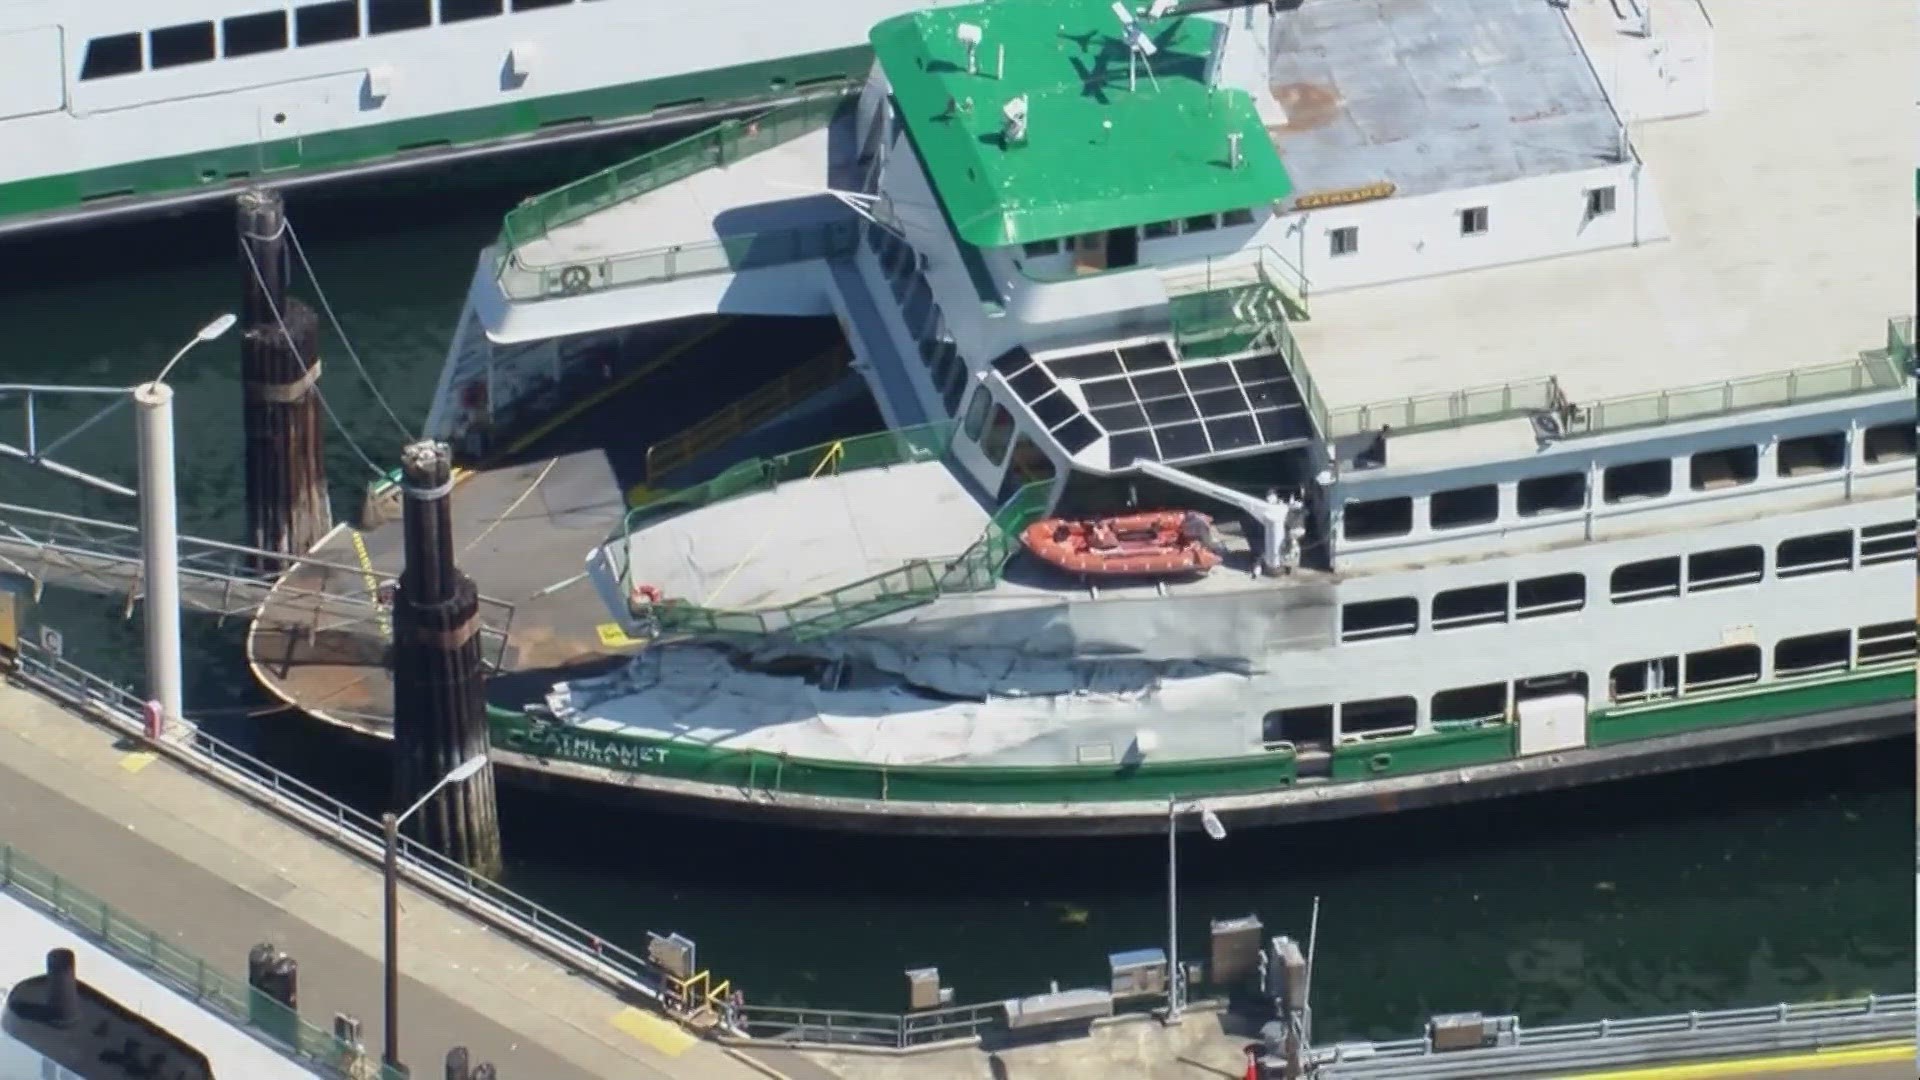 The collision at the Fauntleroy ferry terminal occurred on July 24, 2022. The Cathlamet "did not slow its speed" as it approached the dock.